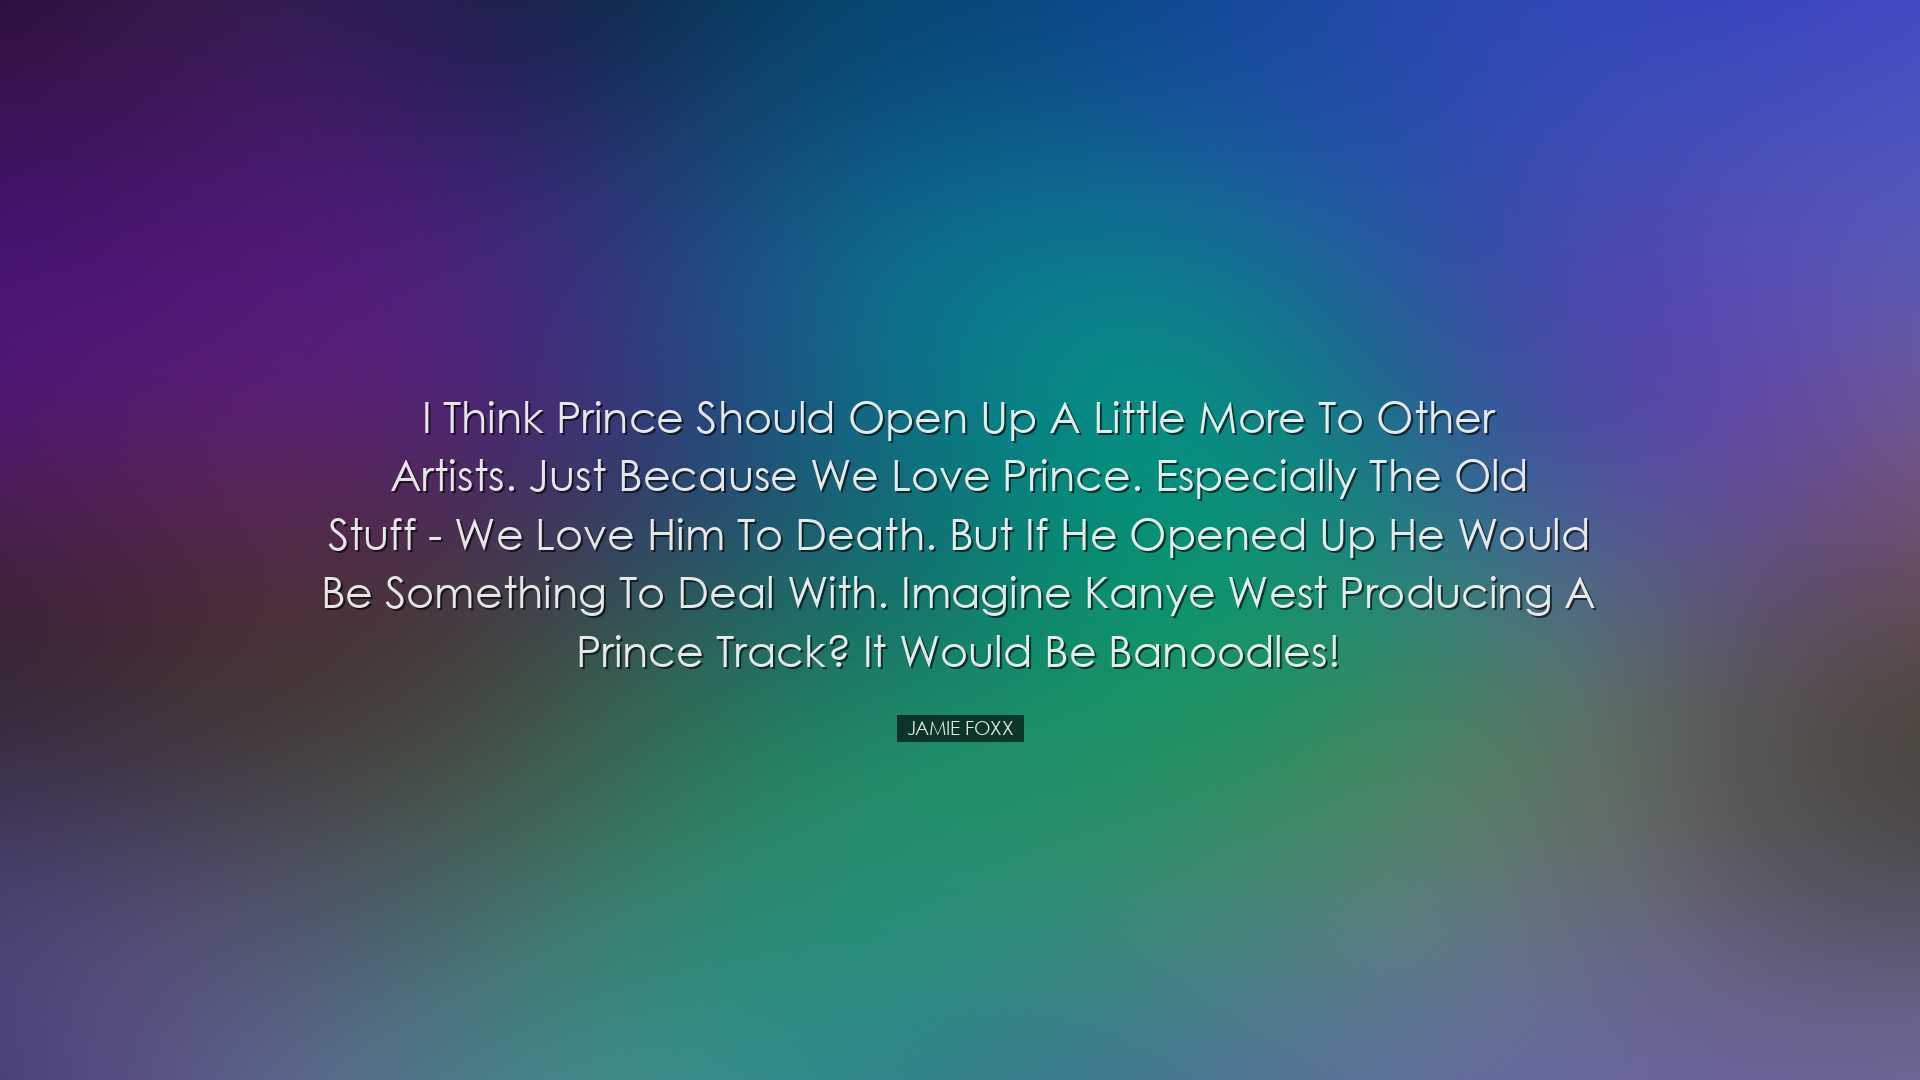 I think Prince should open up a little more to other artists. Just